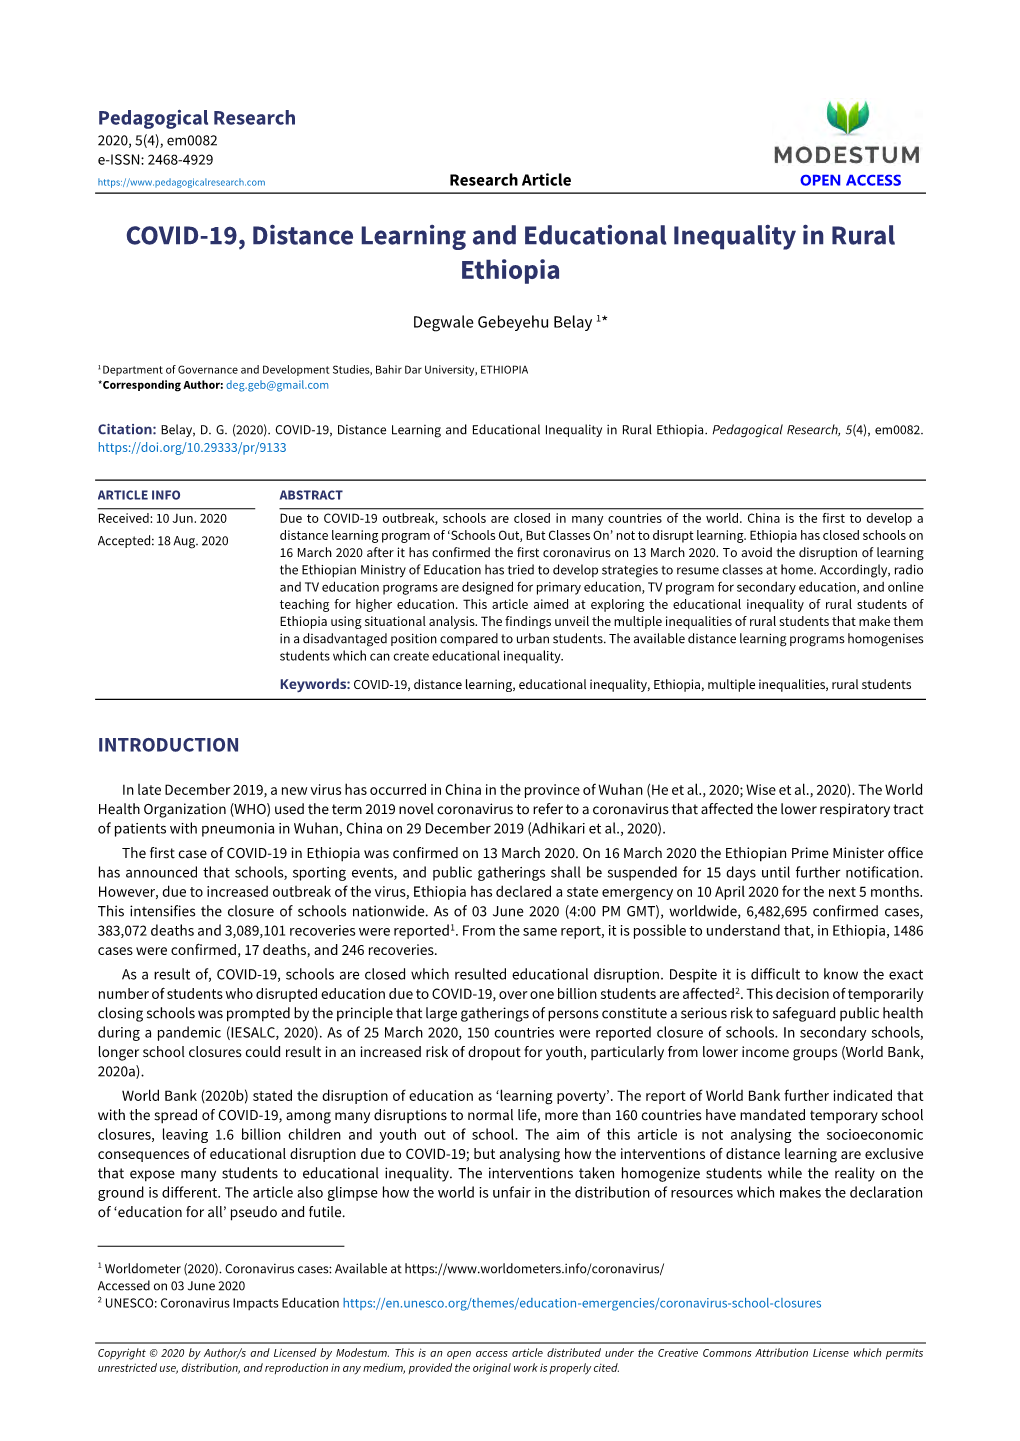 COVID-19, Distance Learning and Educational Inequality in Rural Ethiopia